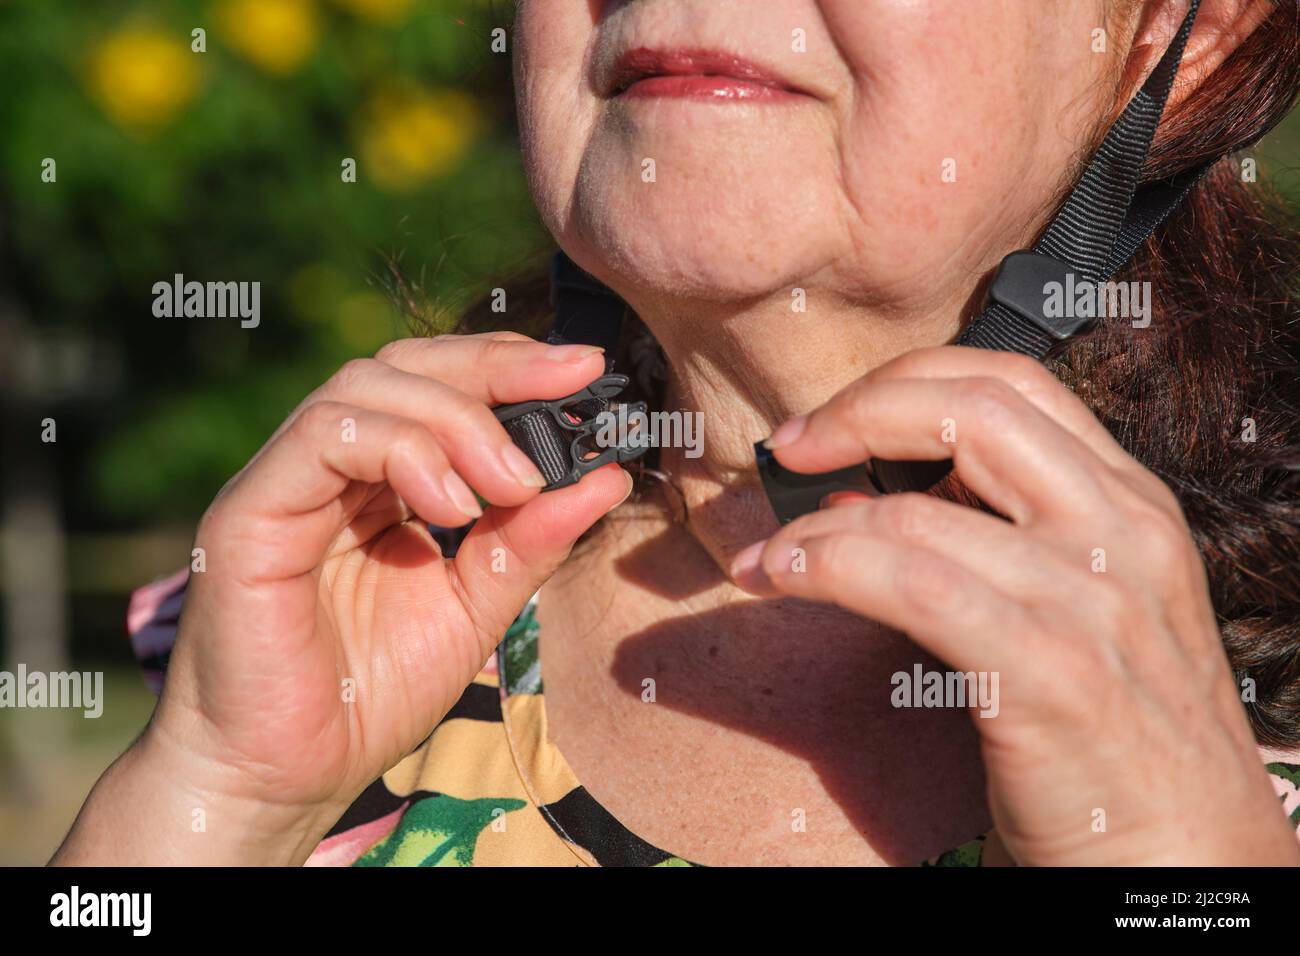 Mature hispanic woman putting on a sports helmet; close up image, detail of the hands fastening it. Concepts of active urban life and road safety. Stock Photo